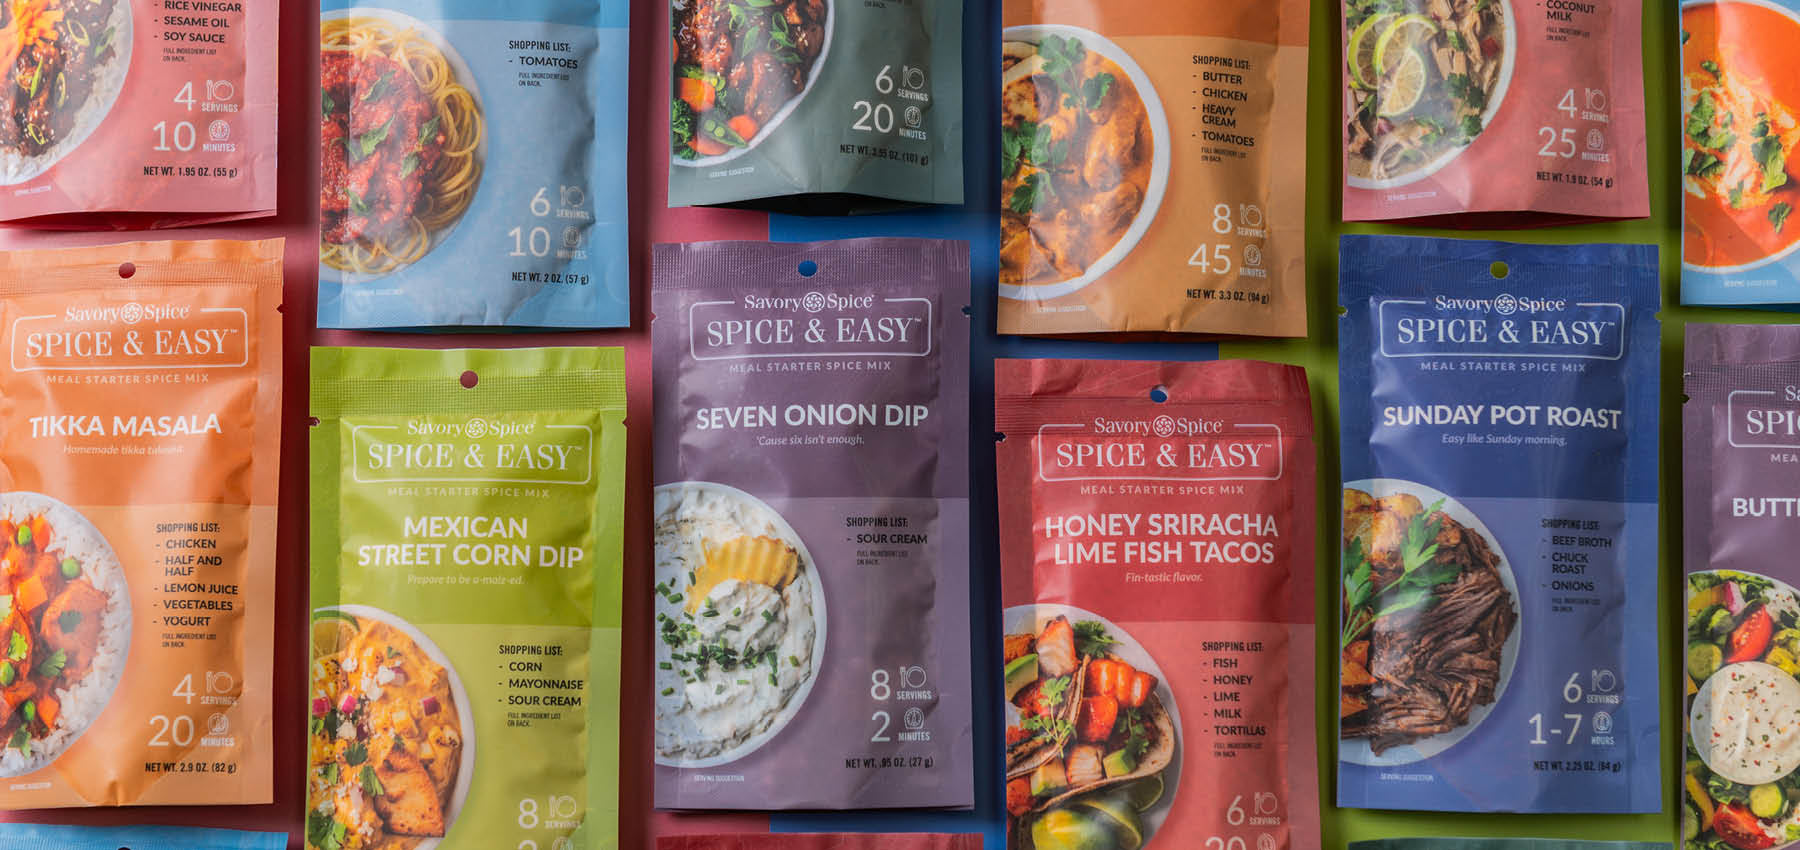 Assortment of Spice 'n Easy Meal Starter Spice Mixes